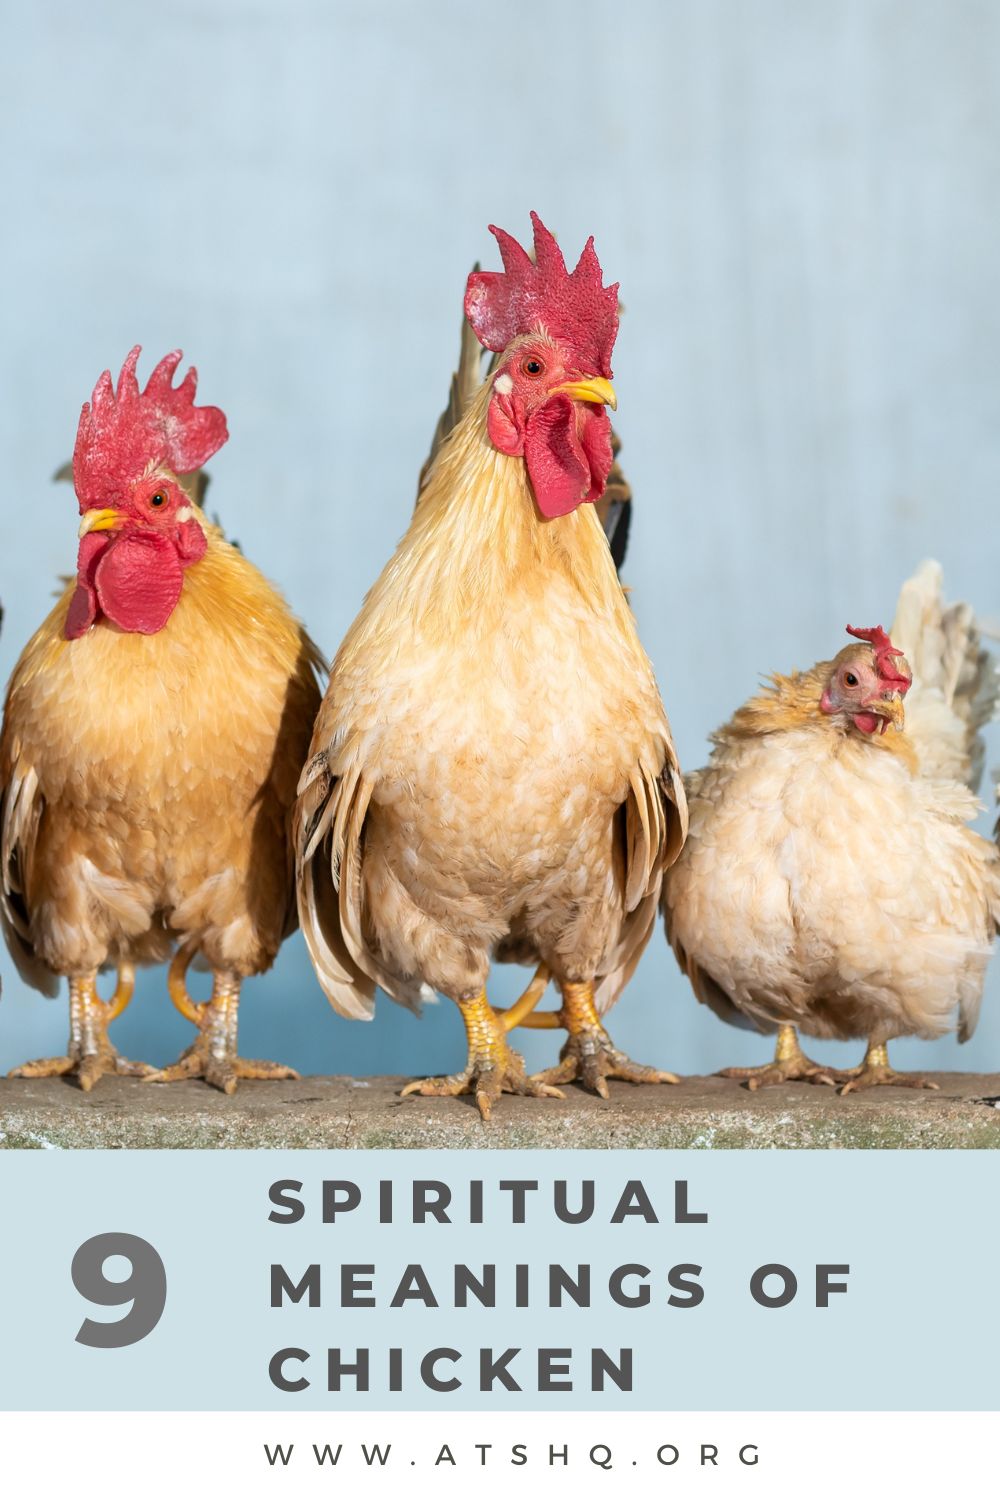 9 Spiritual Meanings of Chicken